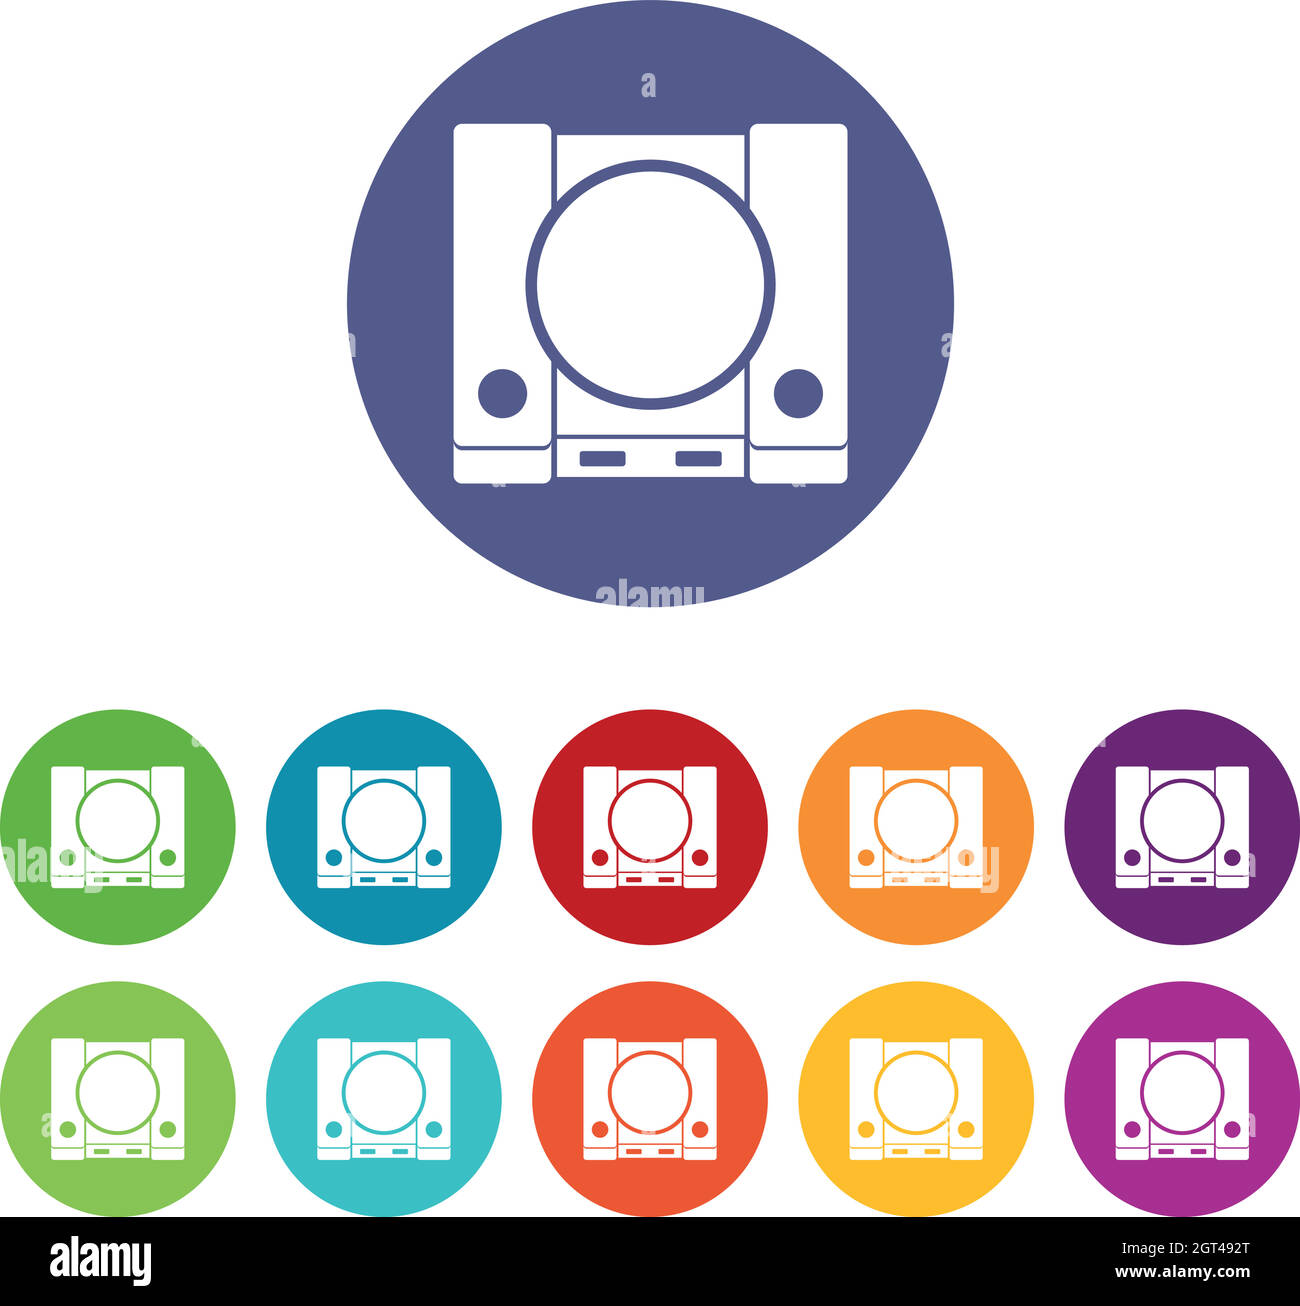 PlayStation set icons Stock Vector